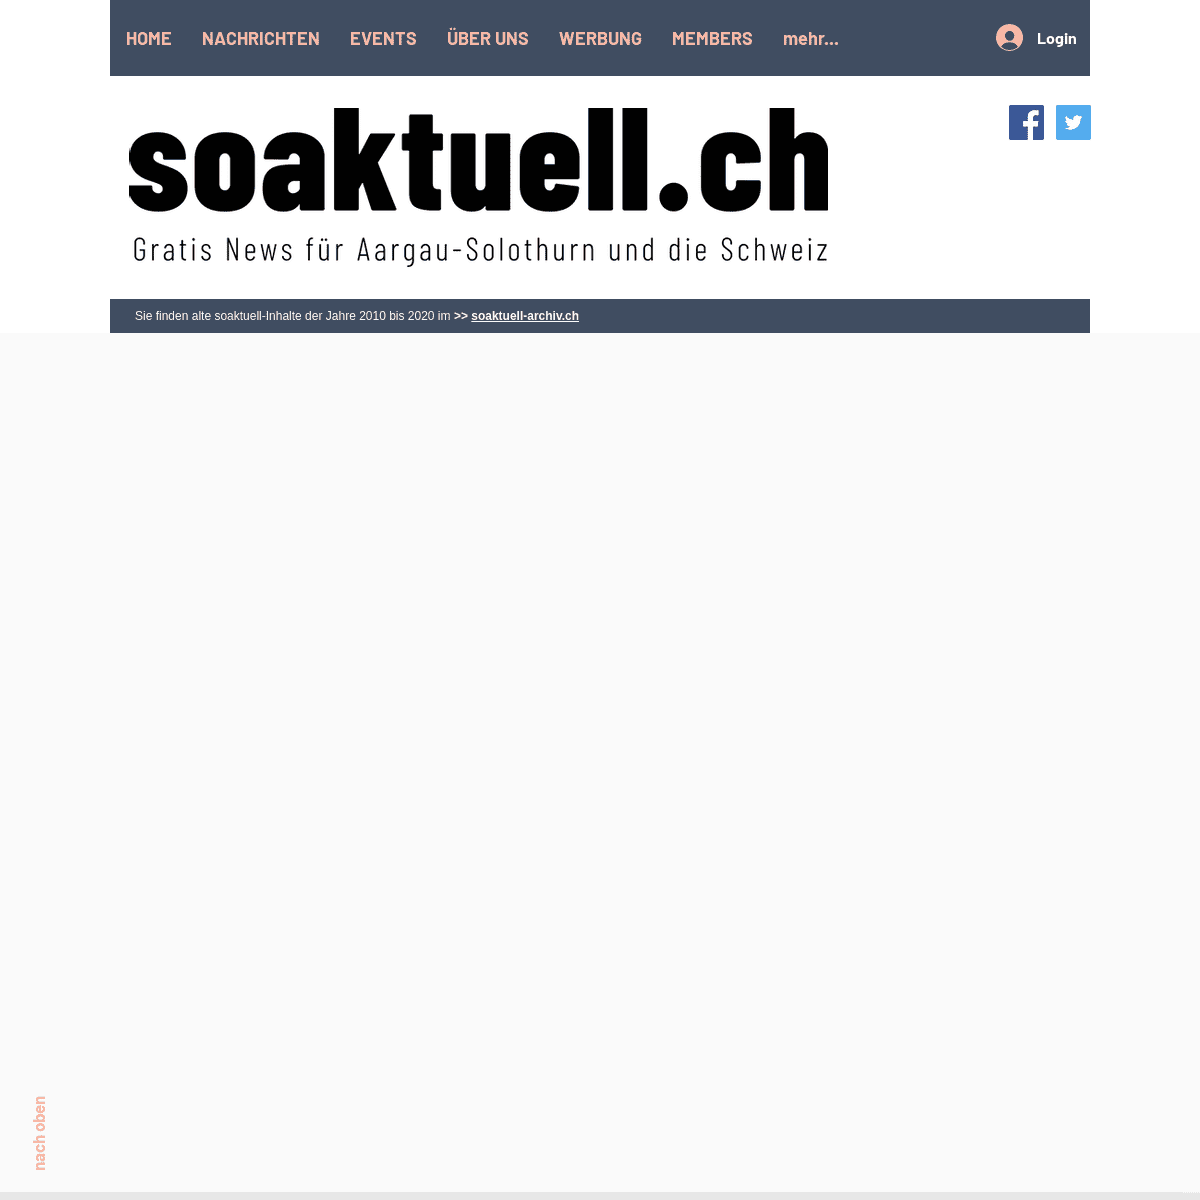 A complete backup of https://soaktuell.ch